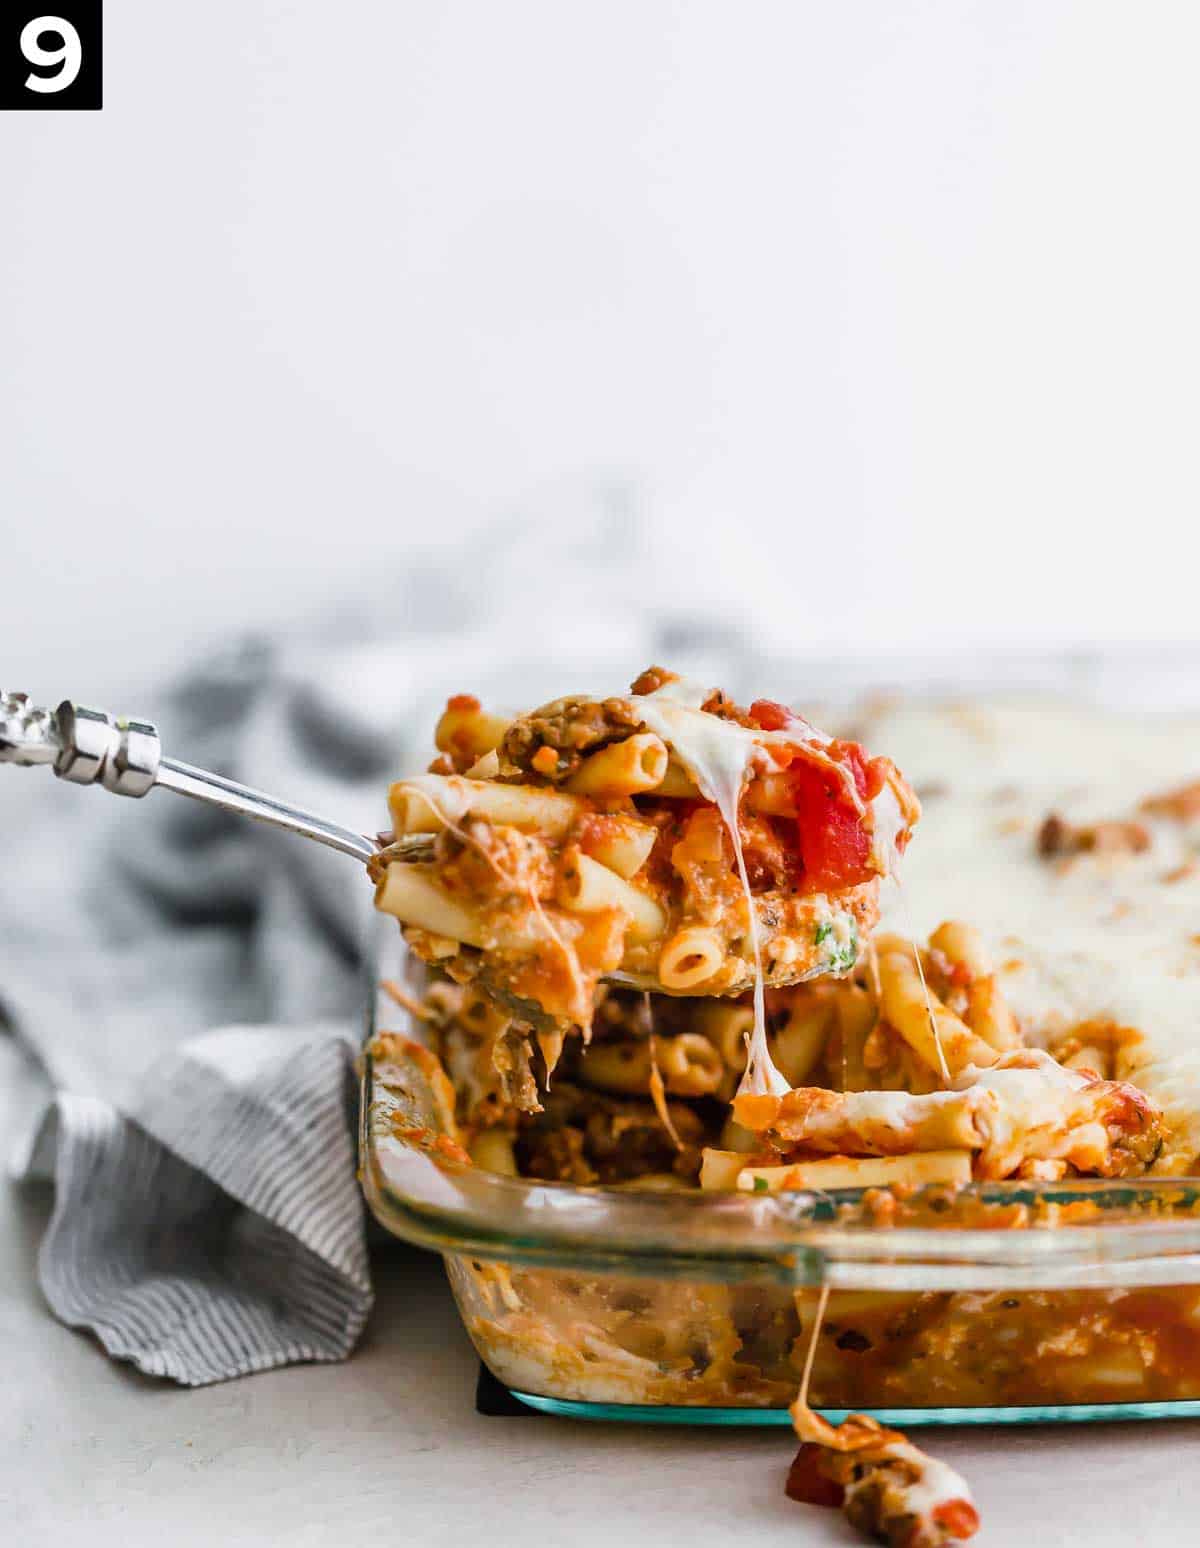 A spoon scooping up baked ziti from a casserole dish.